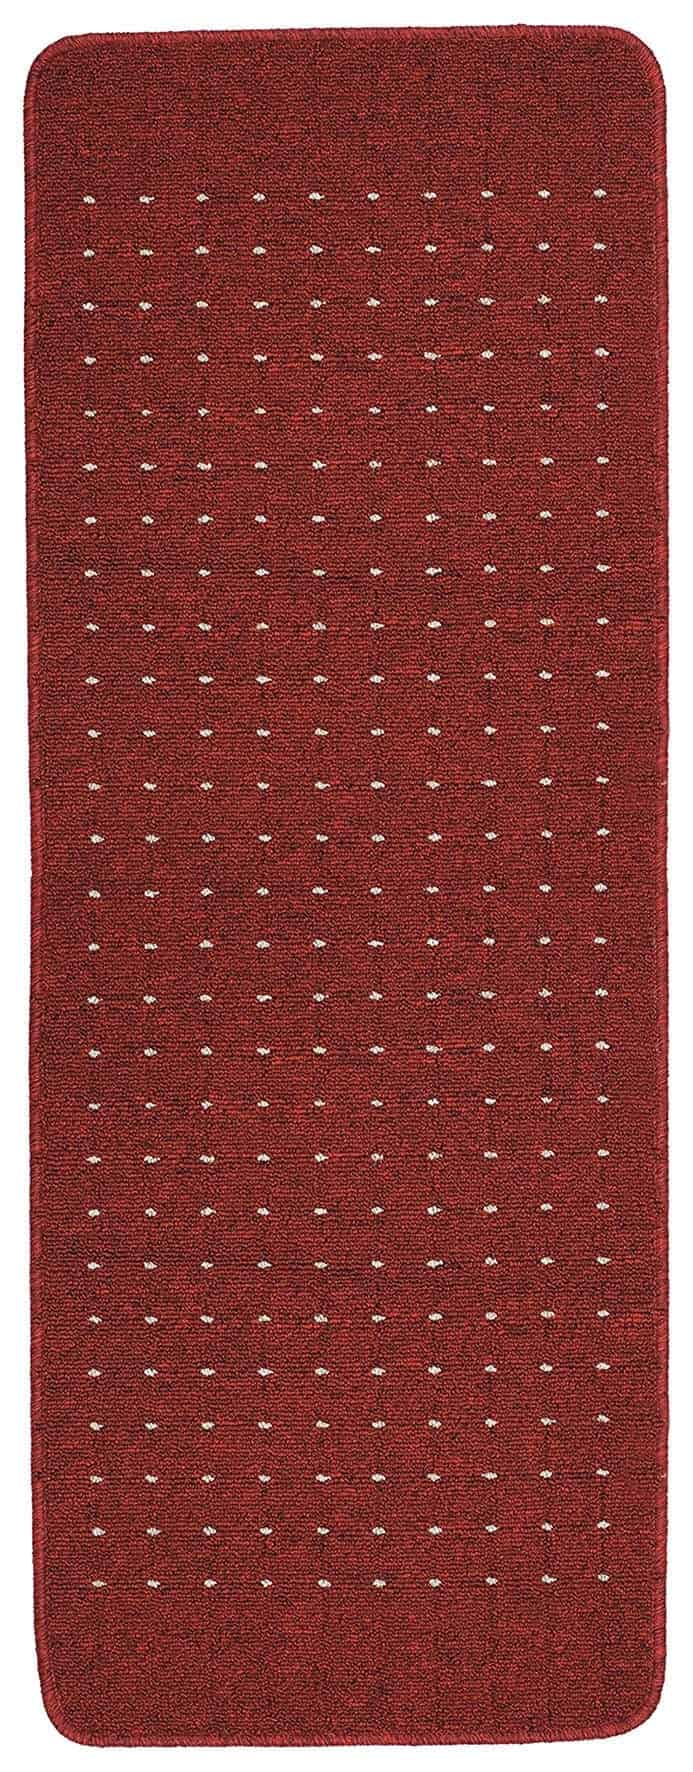 Dandy Stanford Area Rug 180 x 67cm RED CREAM Washable Mats 